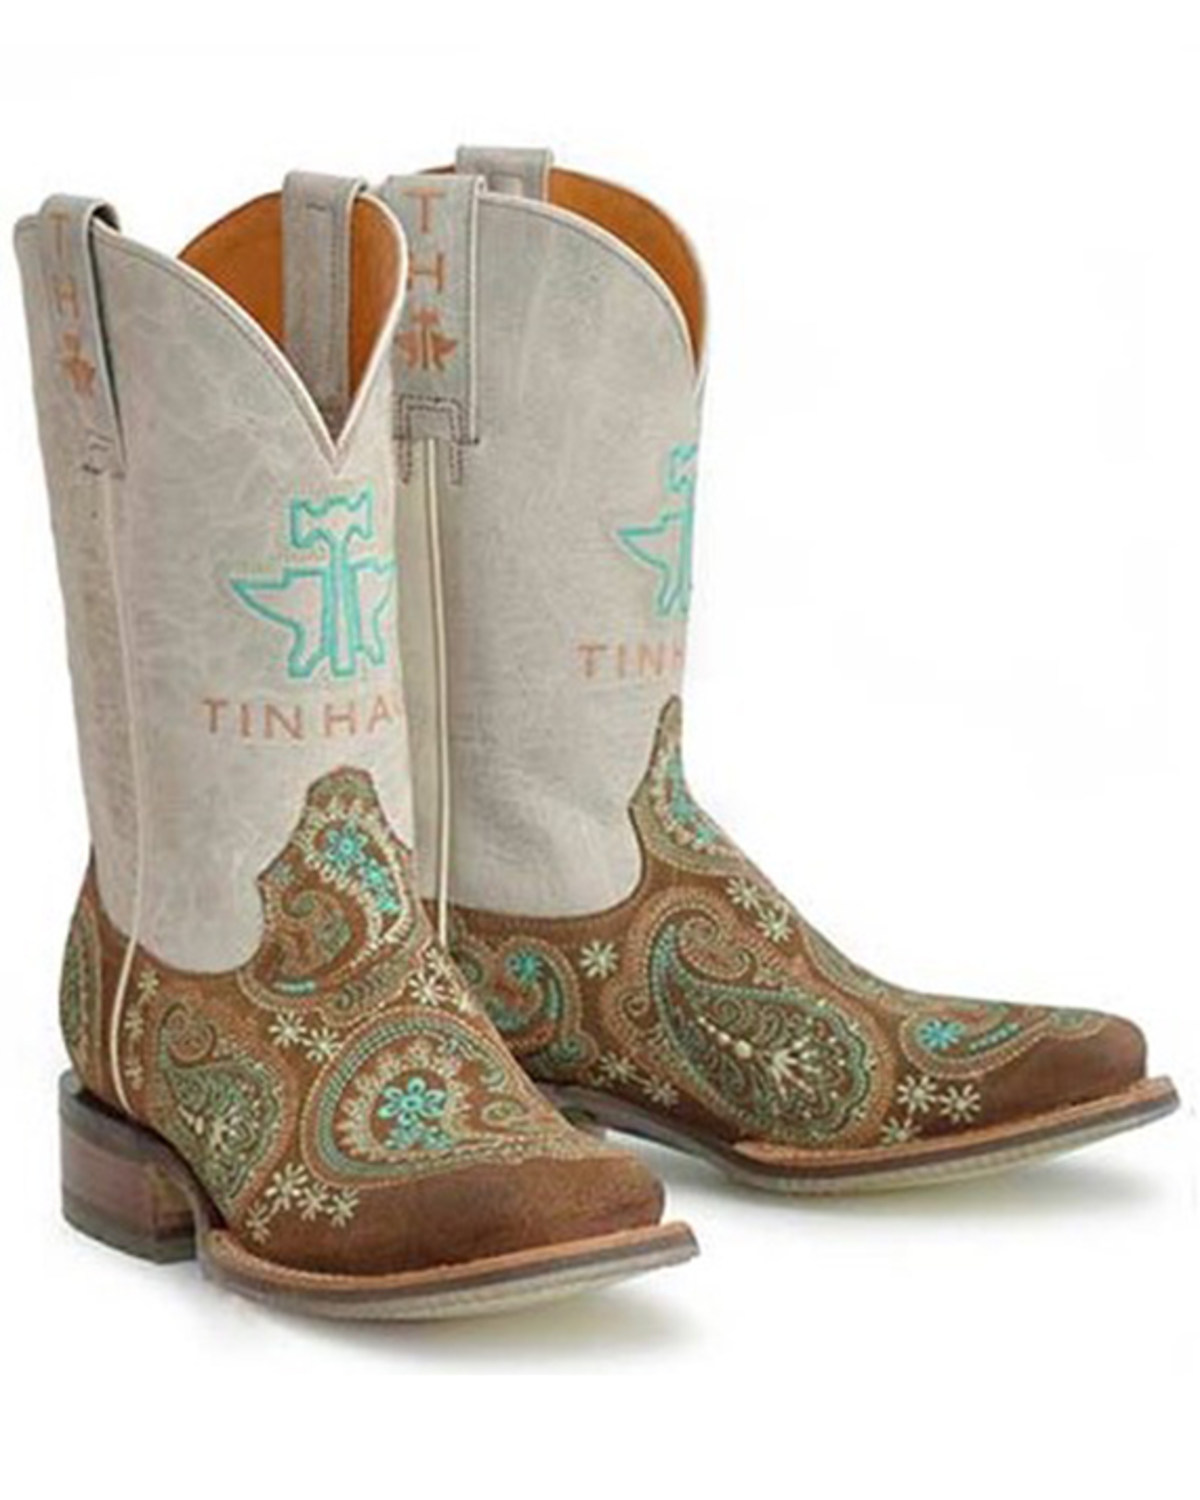 Tin Haul Women's Wild Rags Western Boots - Broad Square Toe